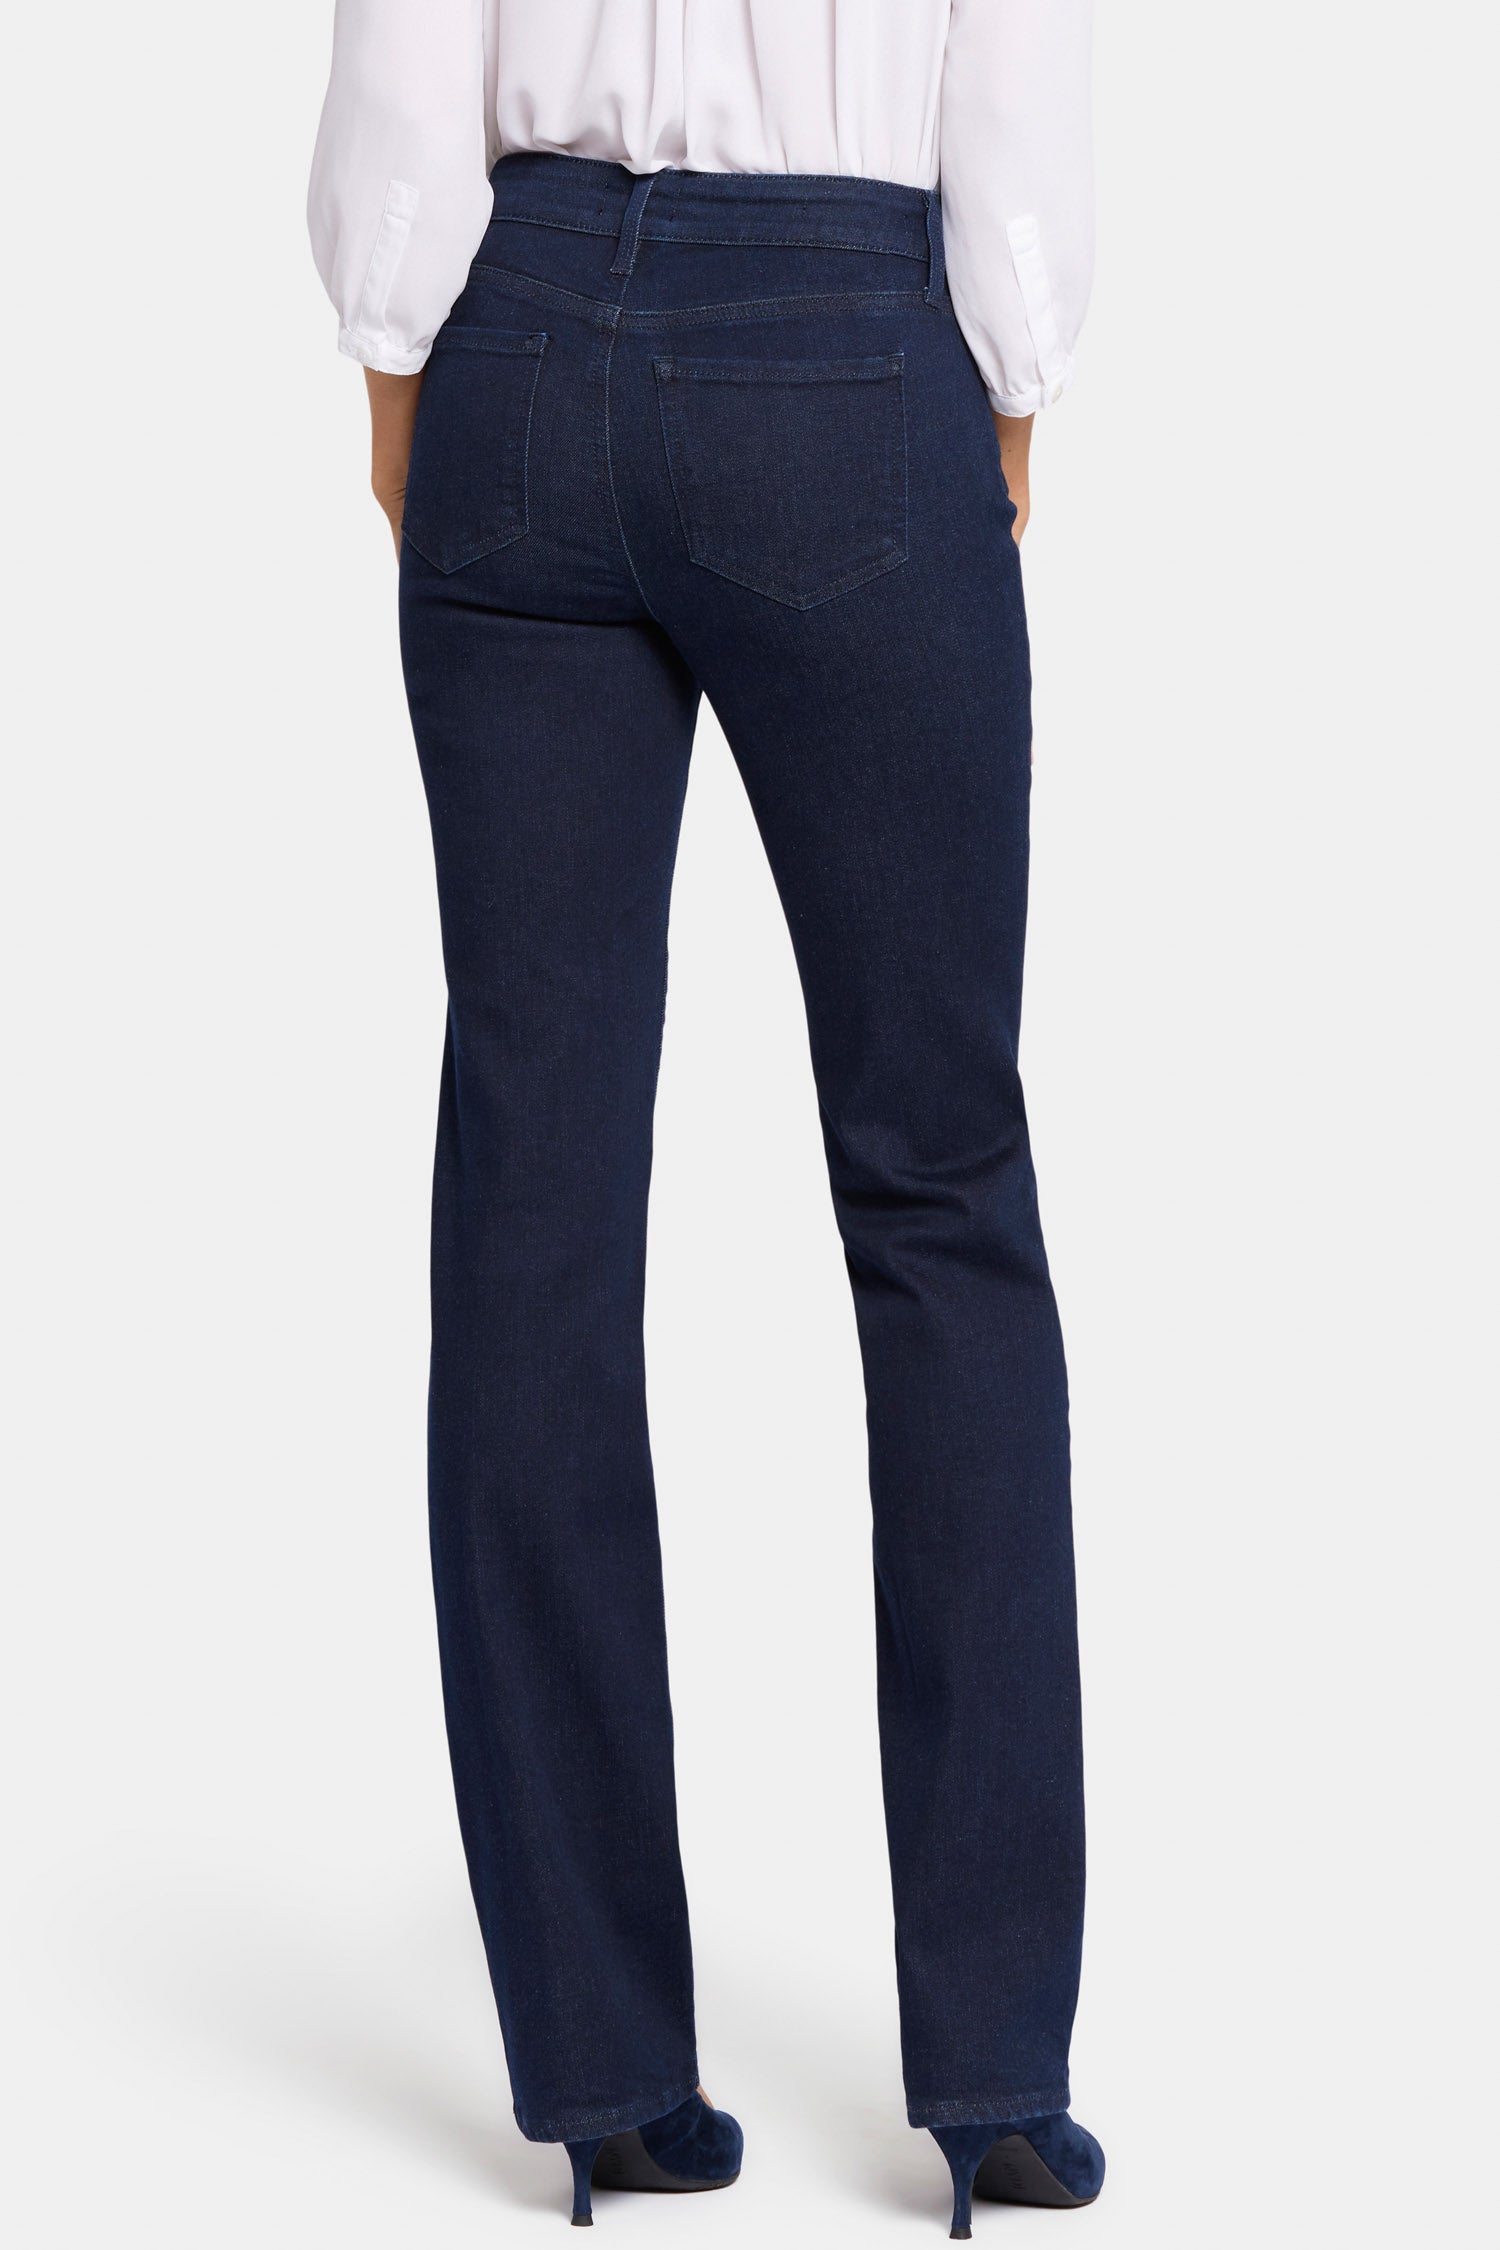 Marilyn Straight Jeans In Tall With 36 Inseam - Rinse Blue